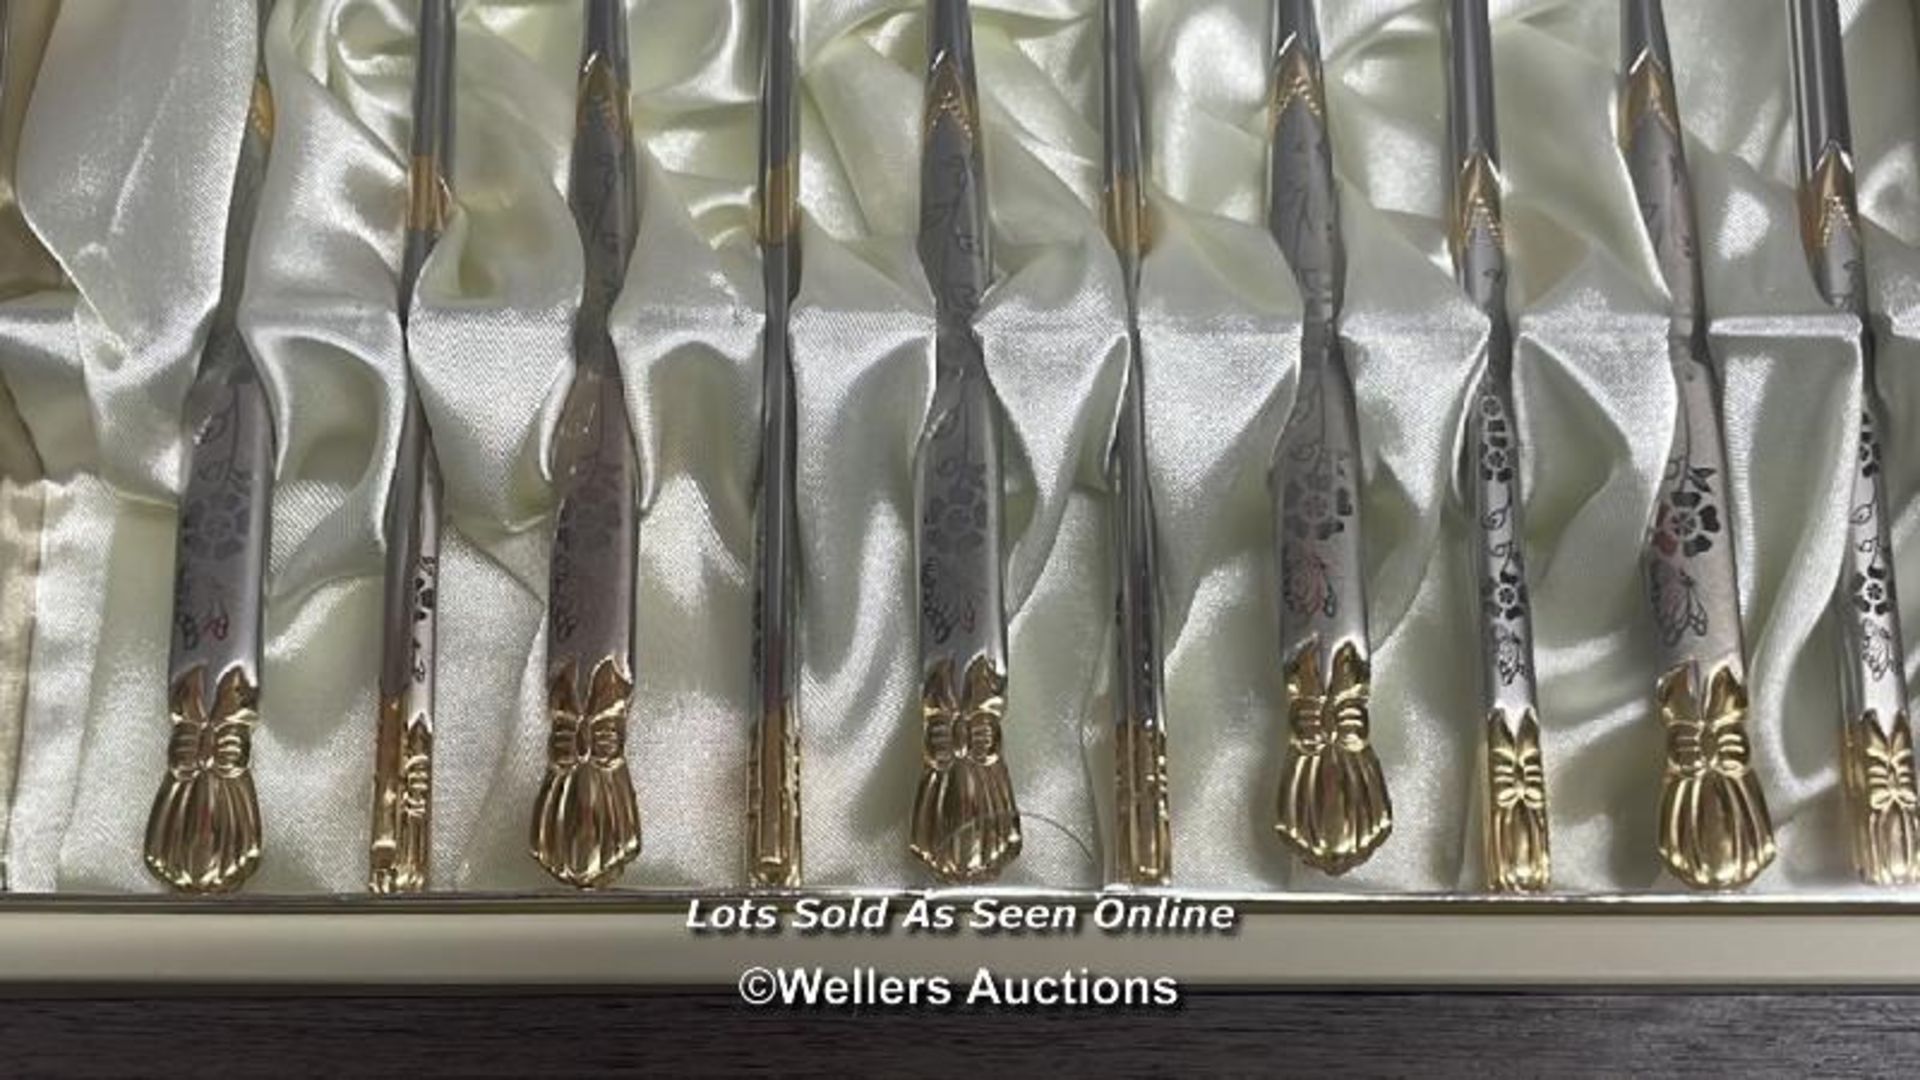 QUEENSENSE PARTLY 24K GOLD PLATET SPOON SET - Image 2 of 4